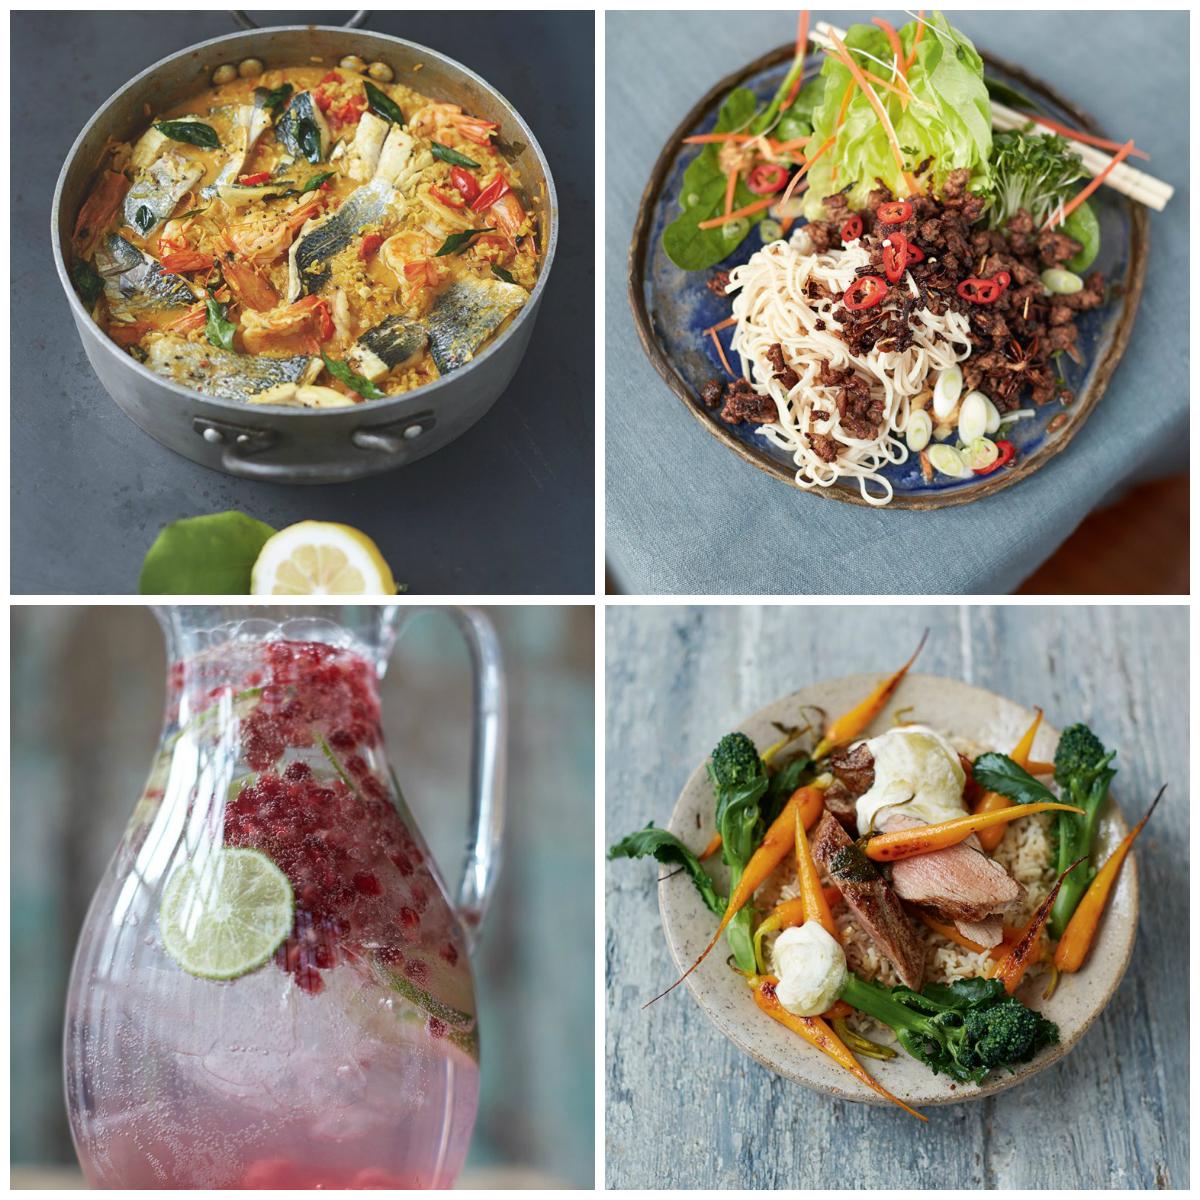 On now guys #JamiesSuperFood With my favourite super food dinners! @Channel4 https://t.co/hy5BsOKdqX https://t.co/6Cm3hoe0Ln